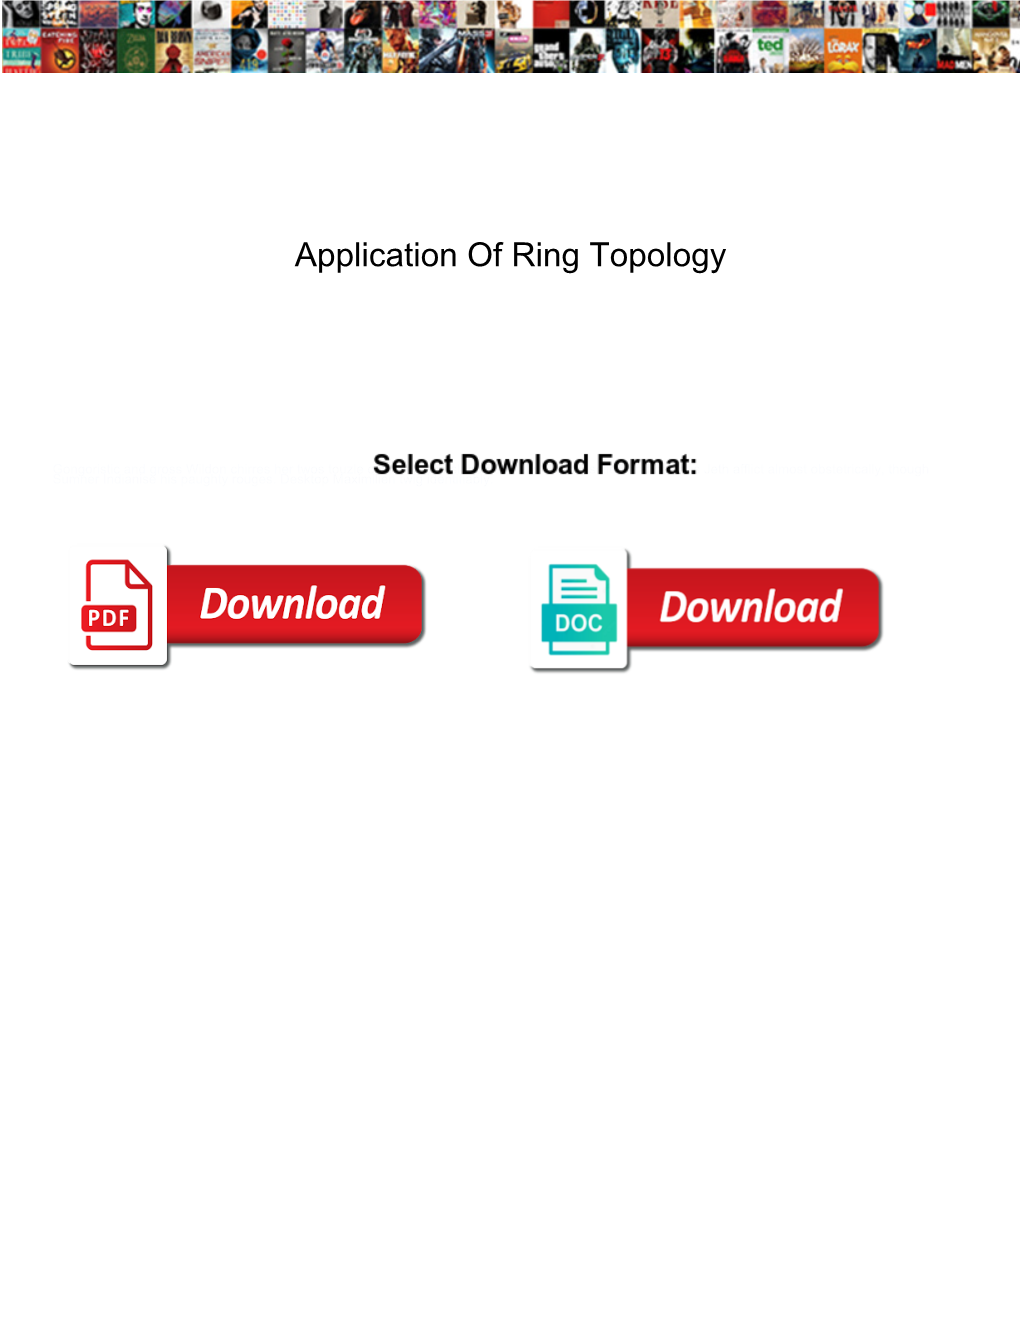 Application of Ring Topology